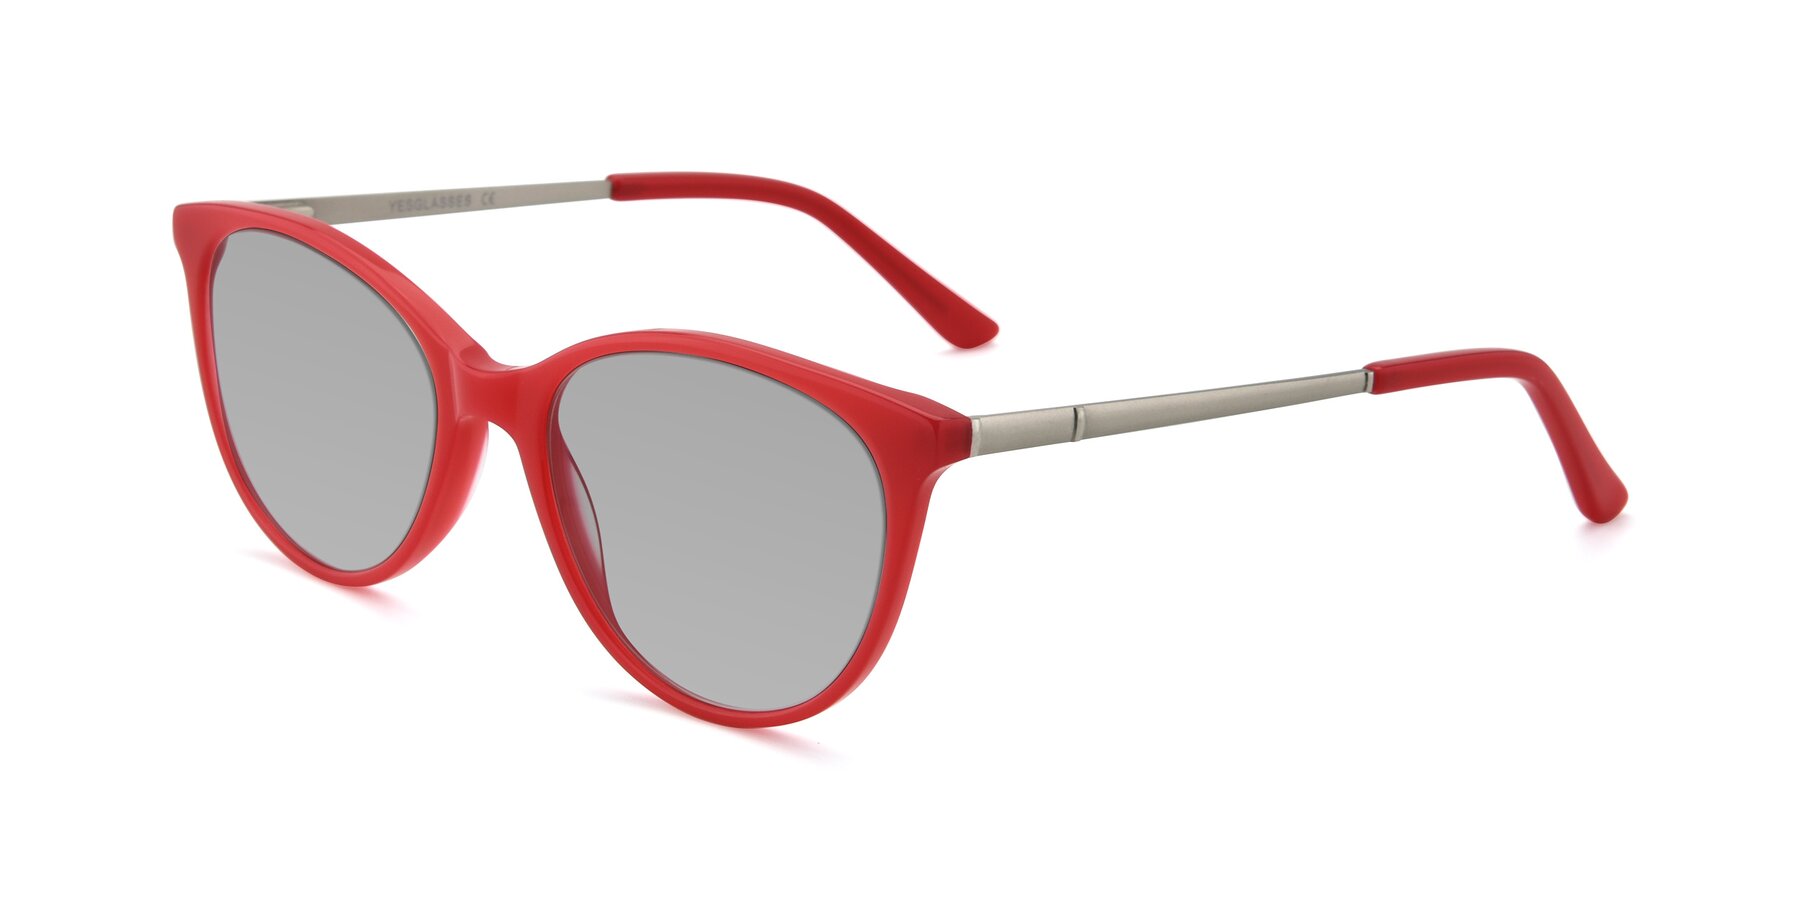 Angle of SR6062 in Rose with Light Gray Tinted Lenses